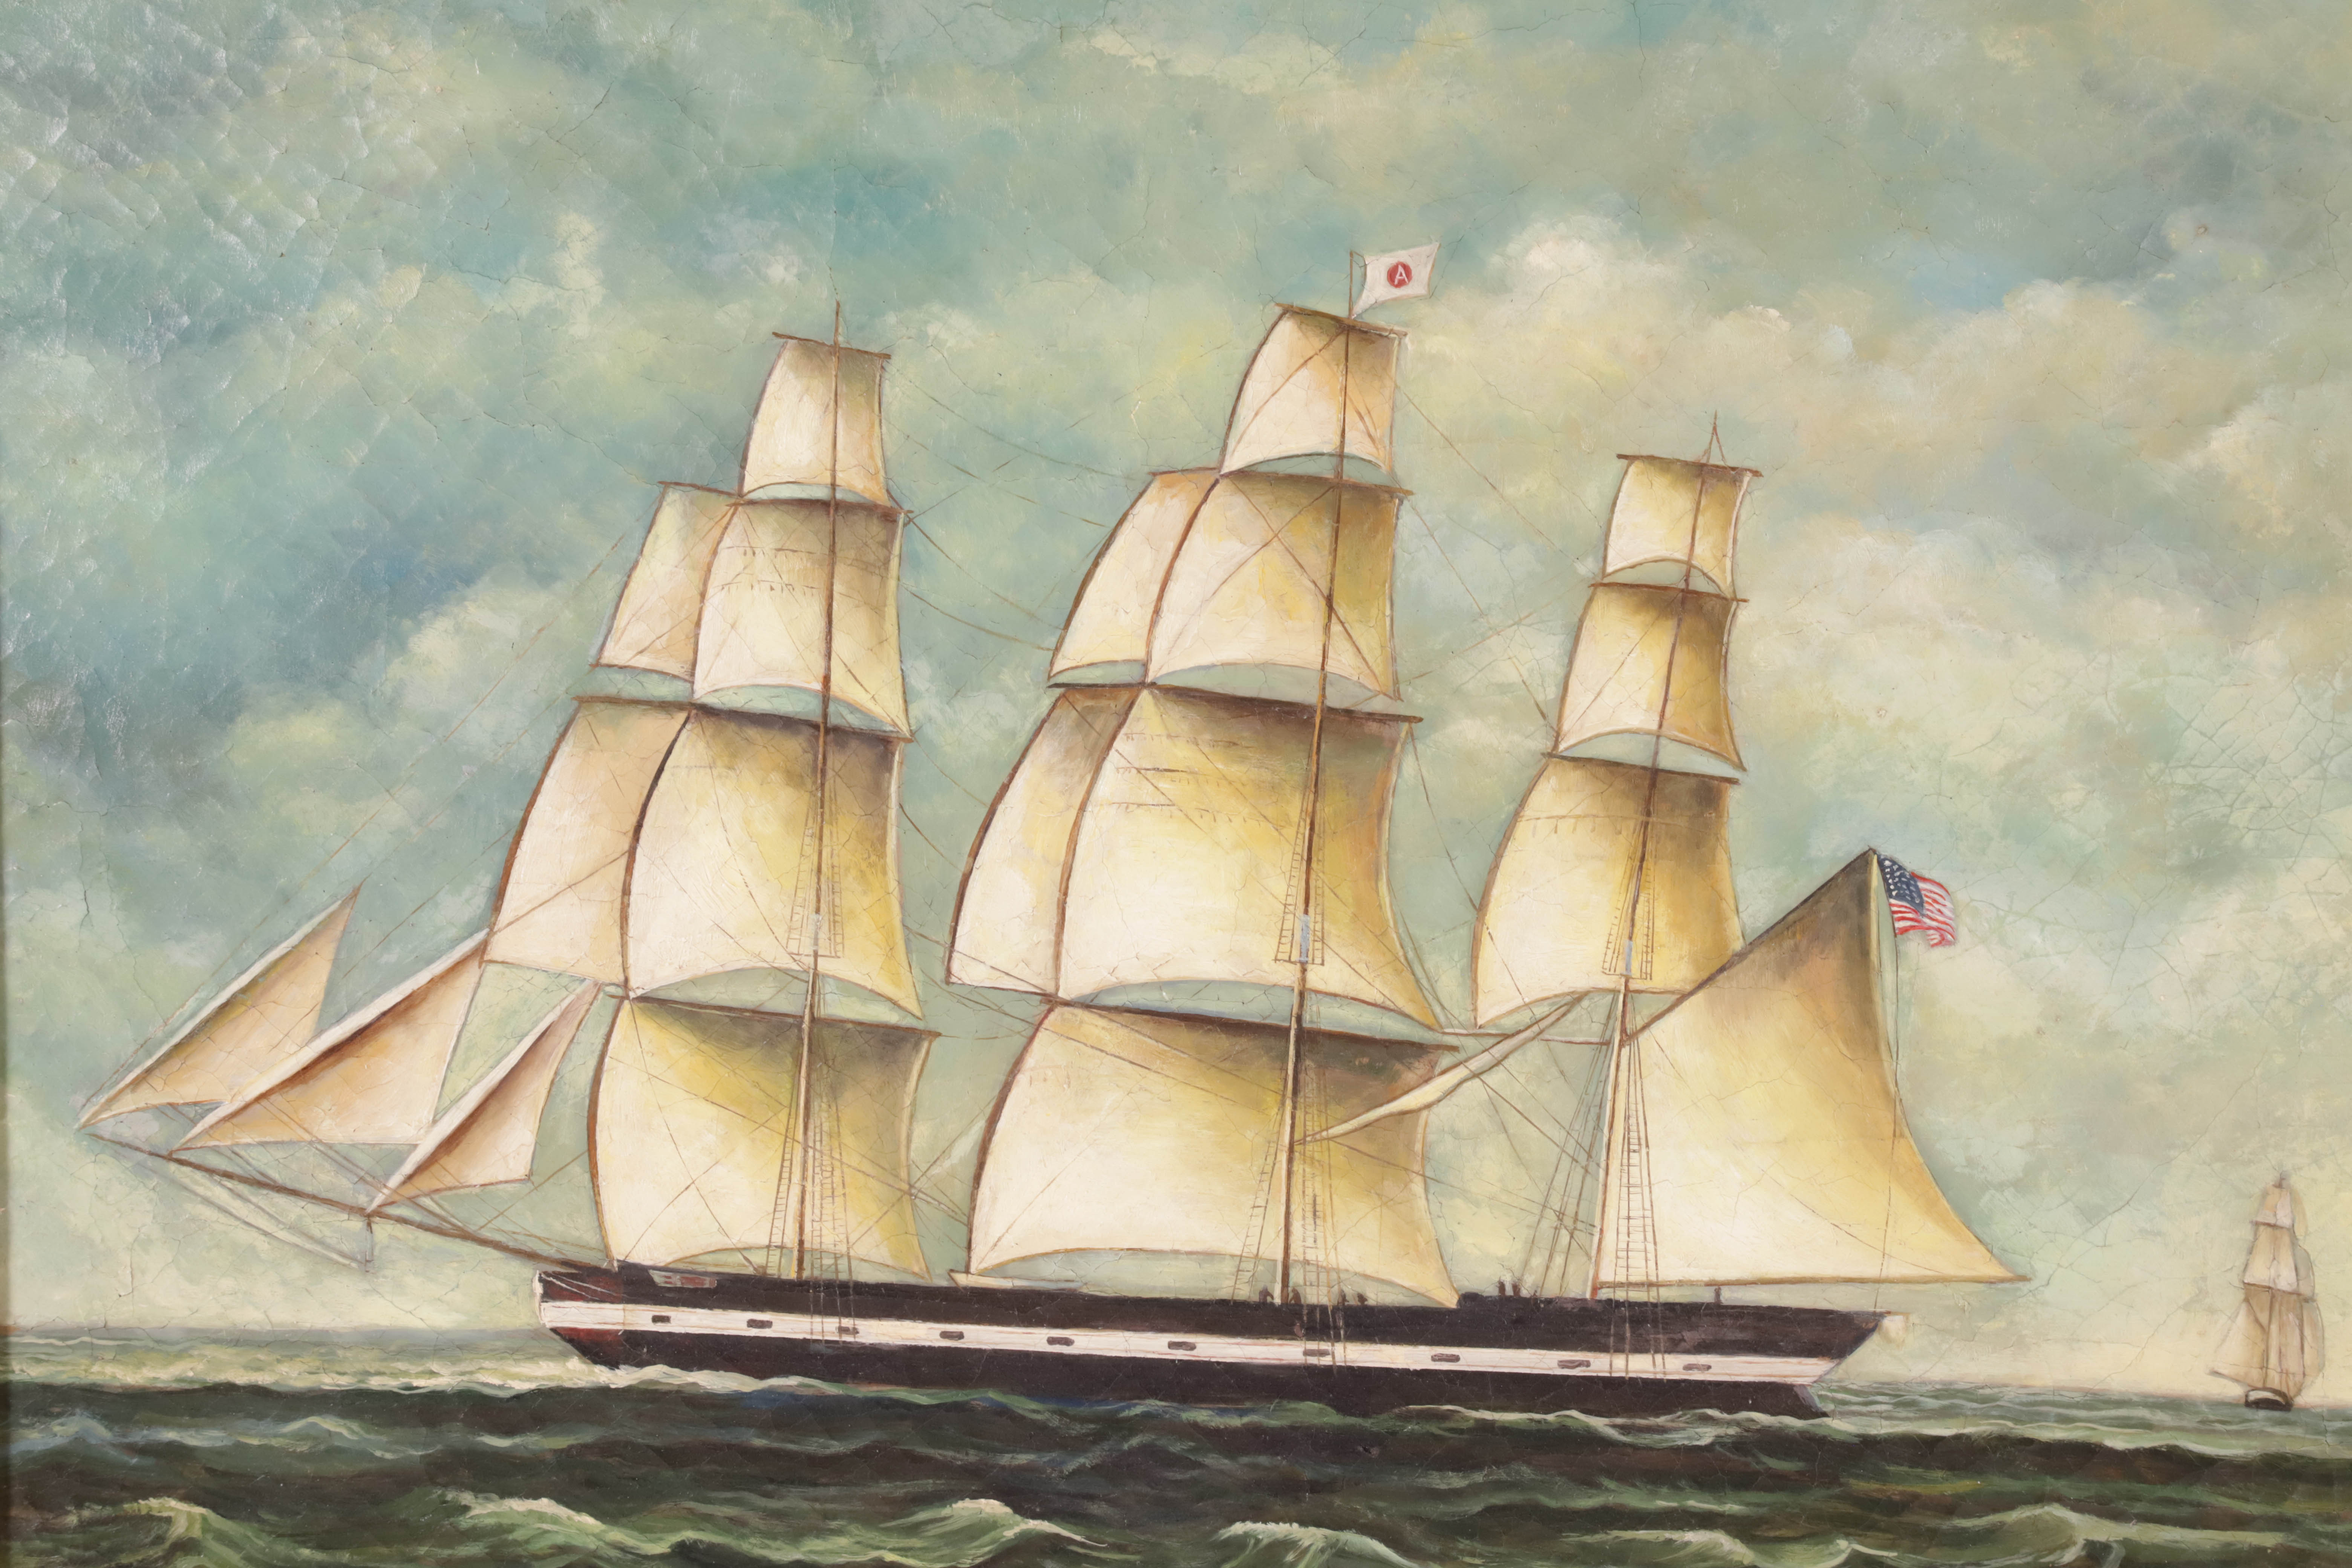 Contemporary China Trade Style Oil on Canvas “Portrait of an American Clipper Ship”